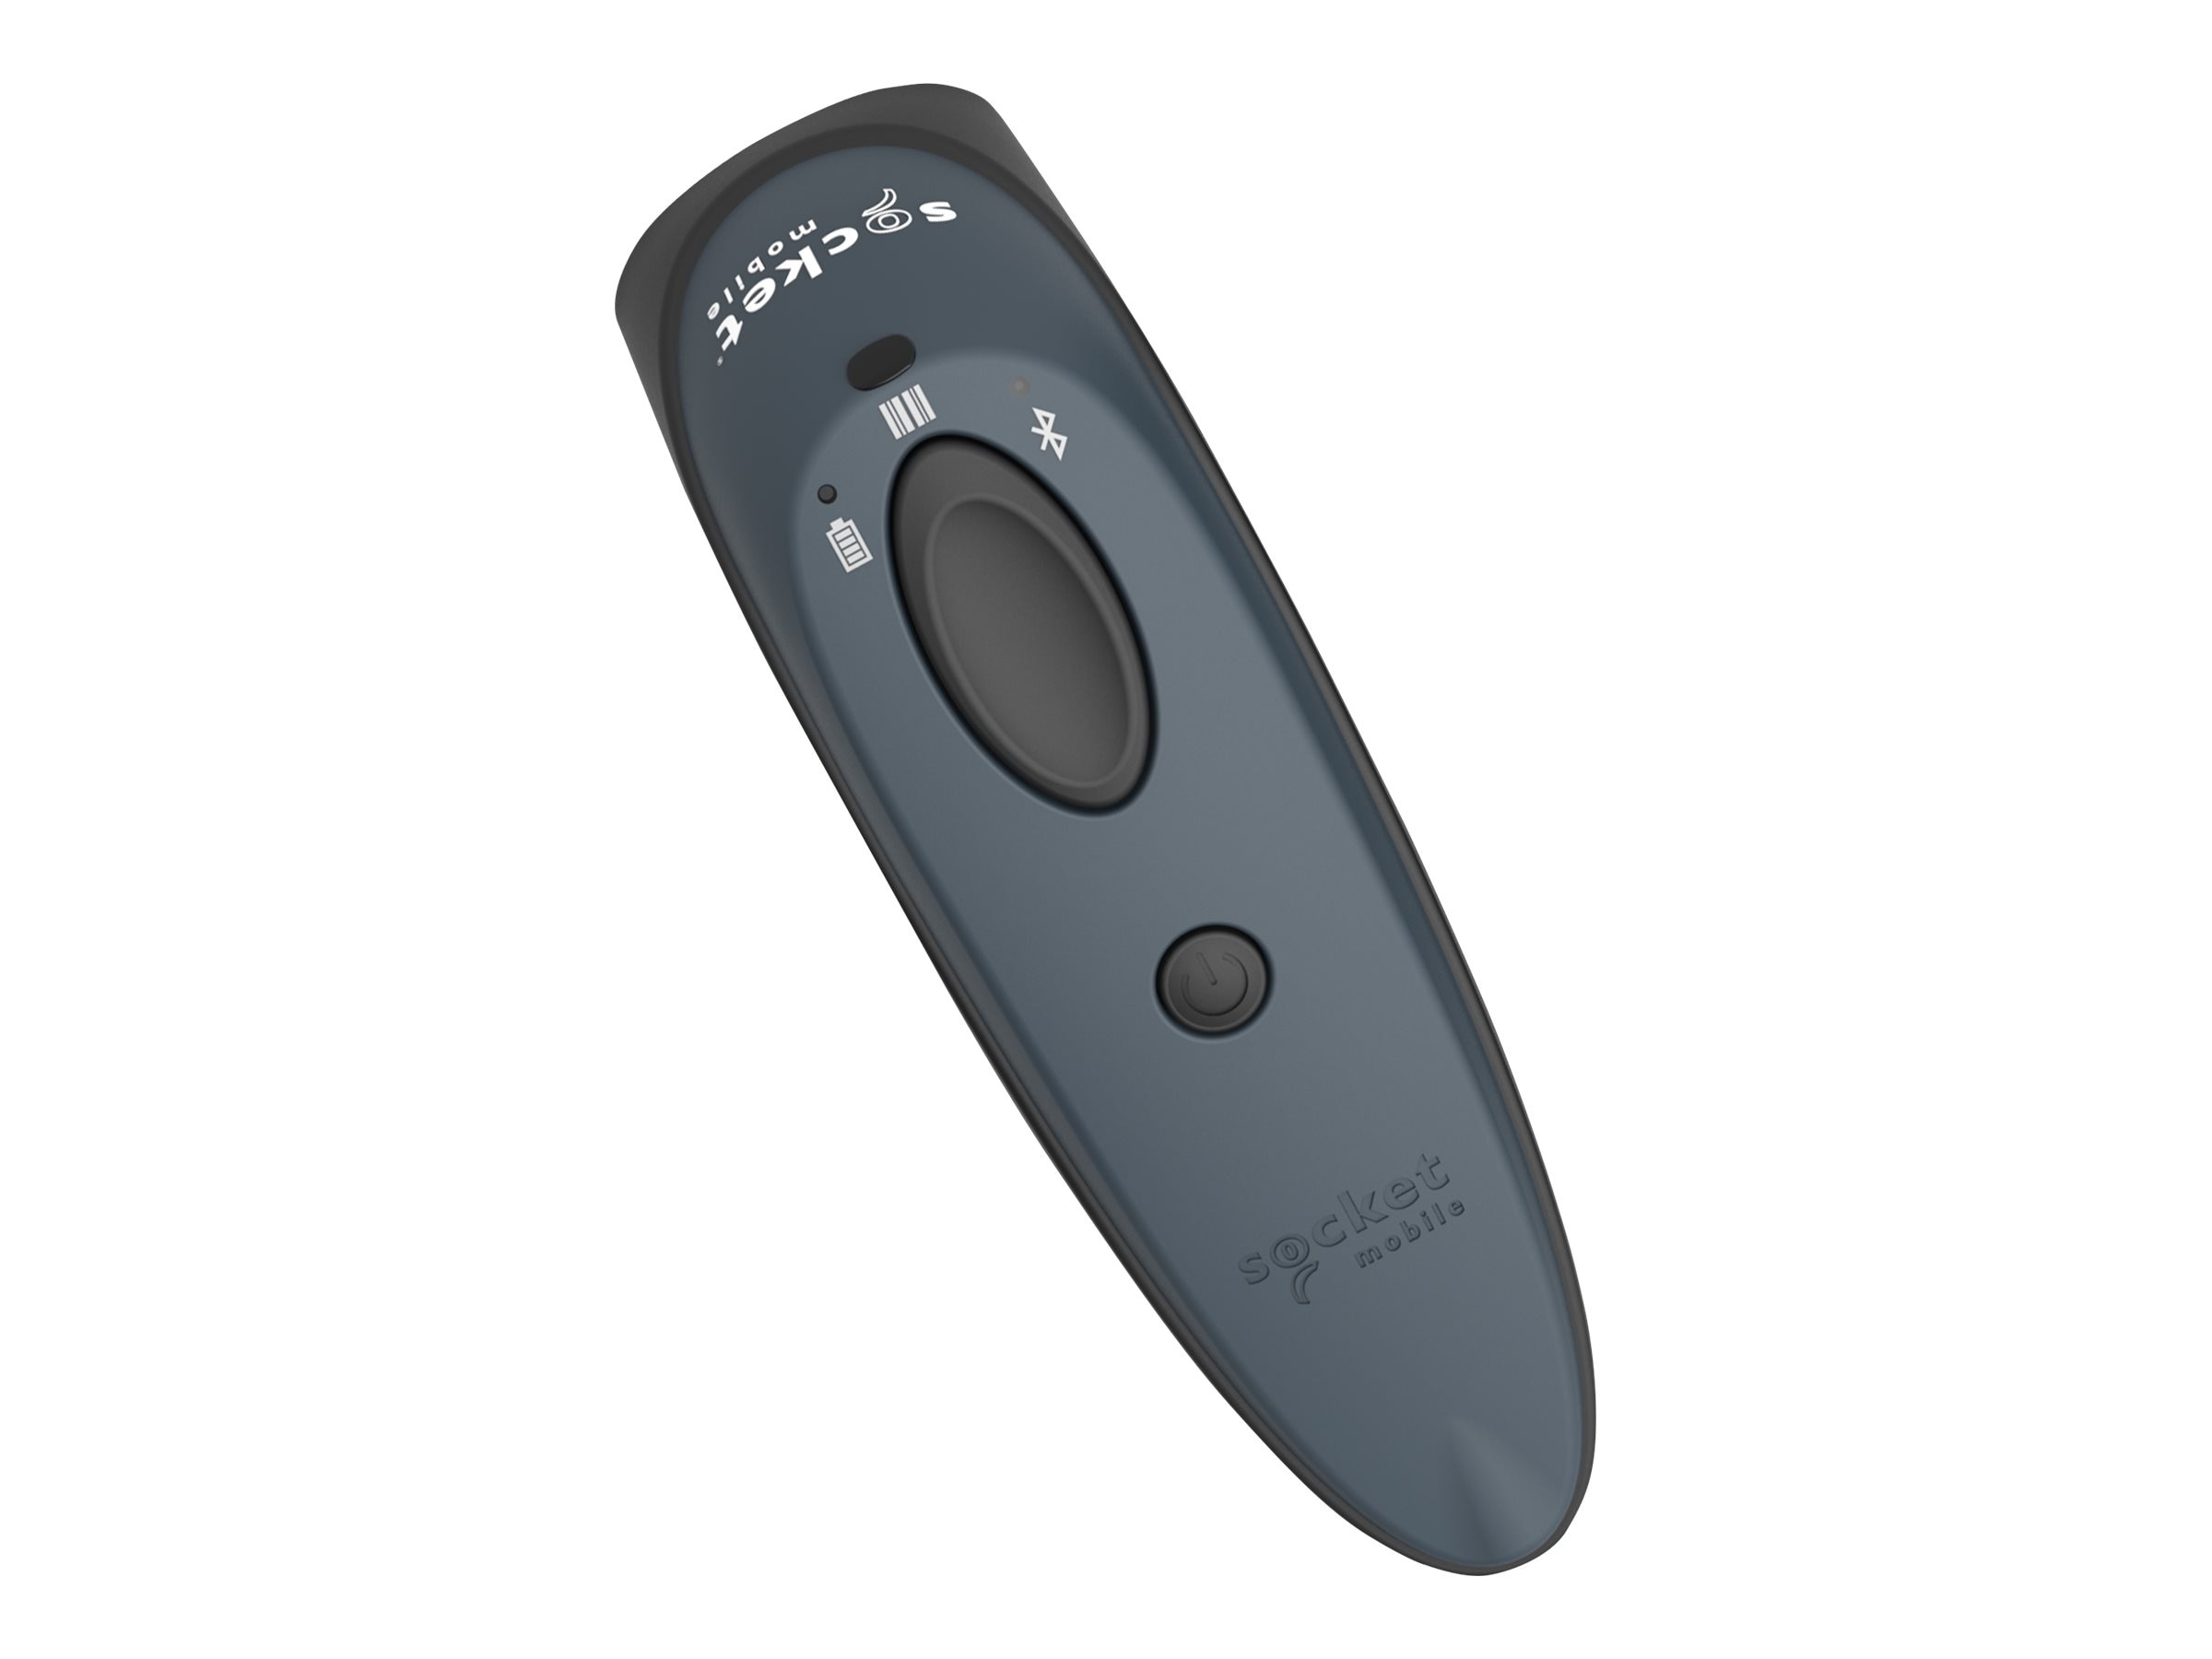 Buy Socket Mobile DuraScan D700, Gray at Connection Public Sector